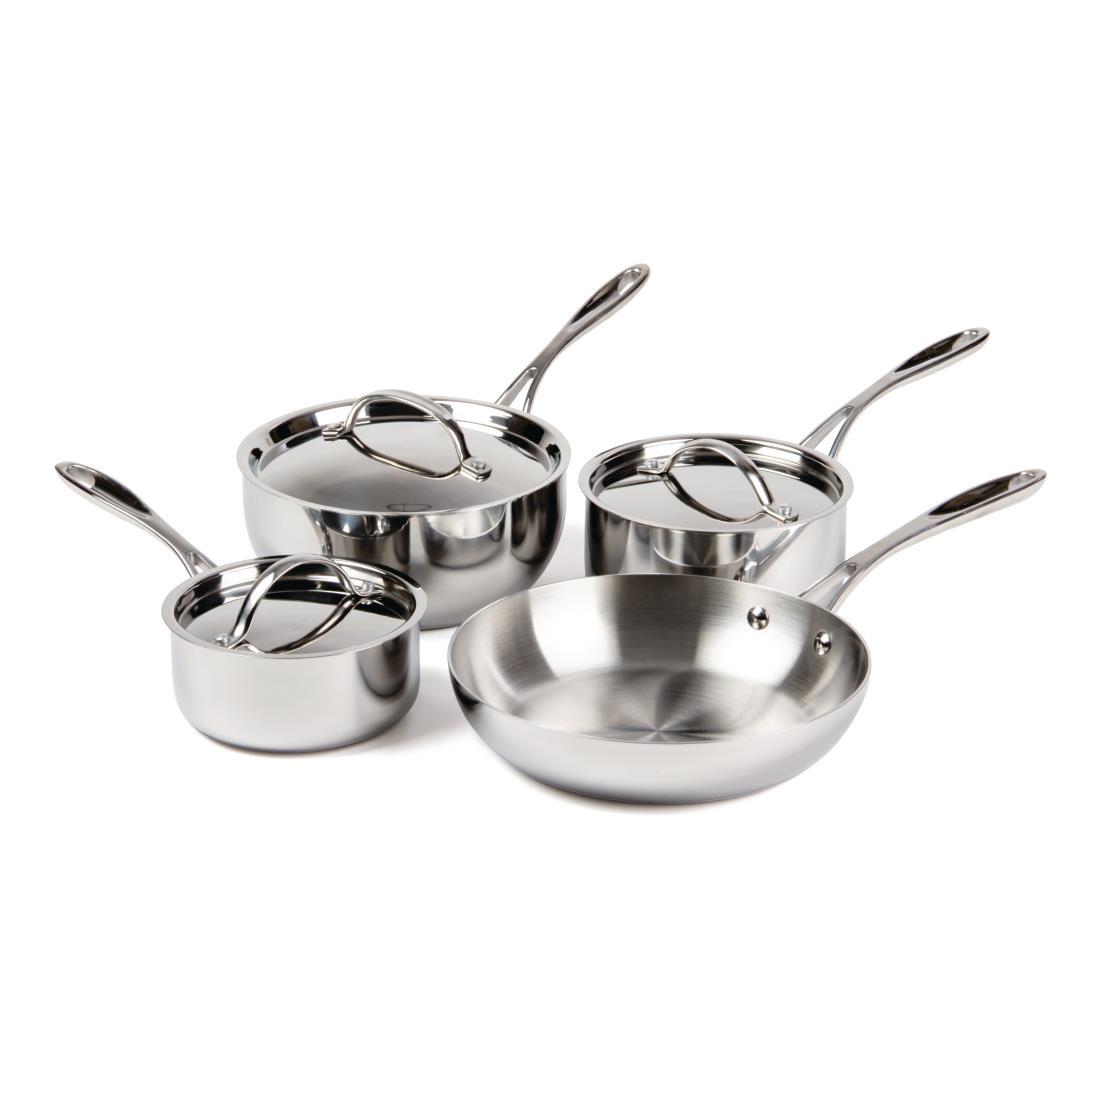 Vogue Tri Wall Flared Saute Pan 200mm - Y240  - 4